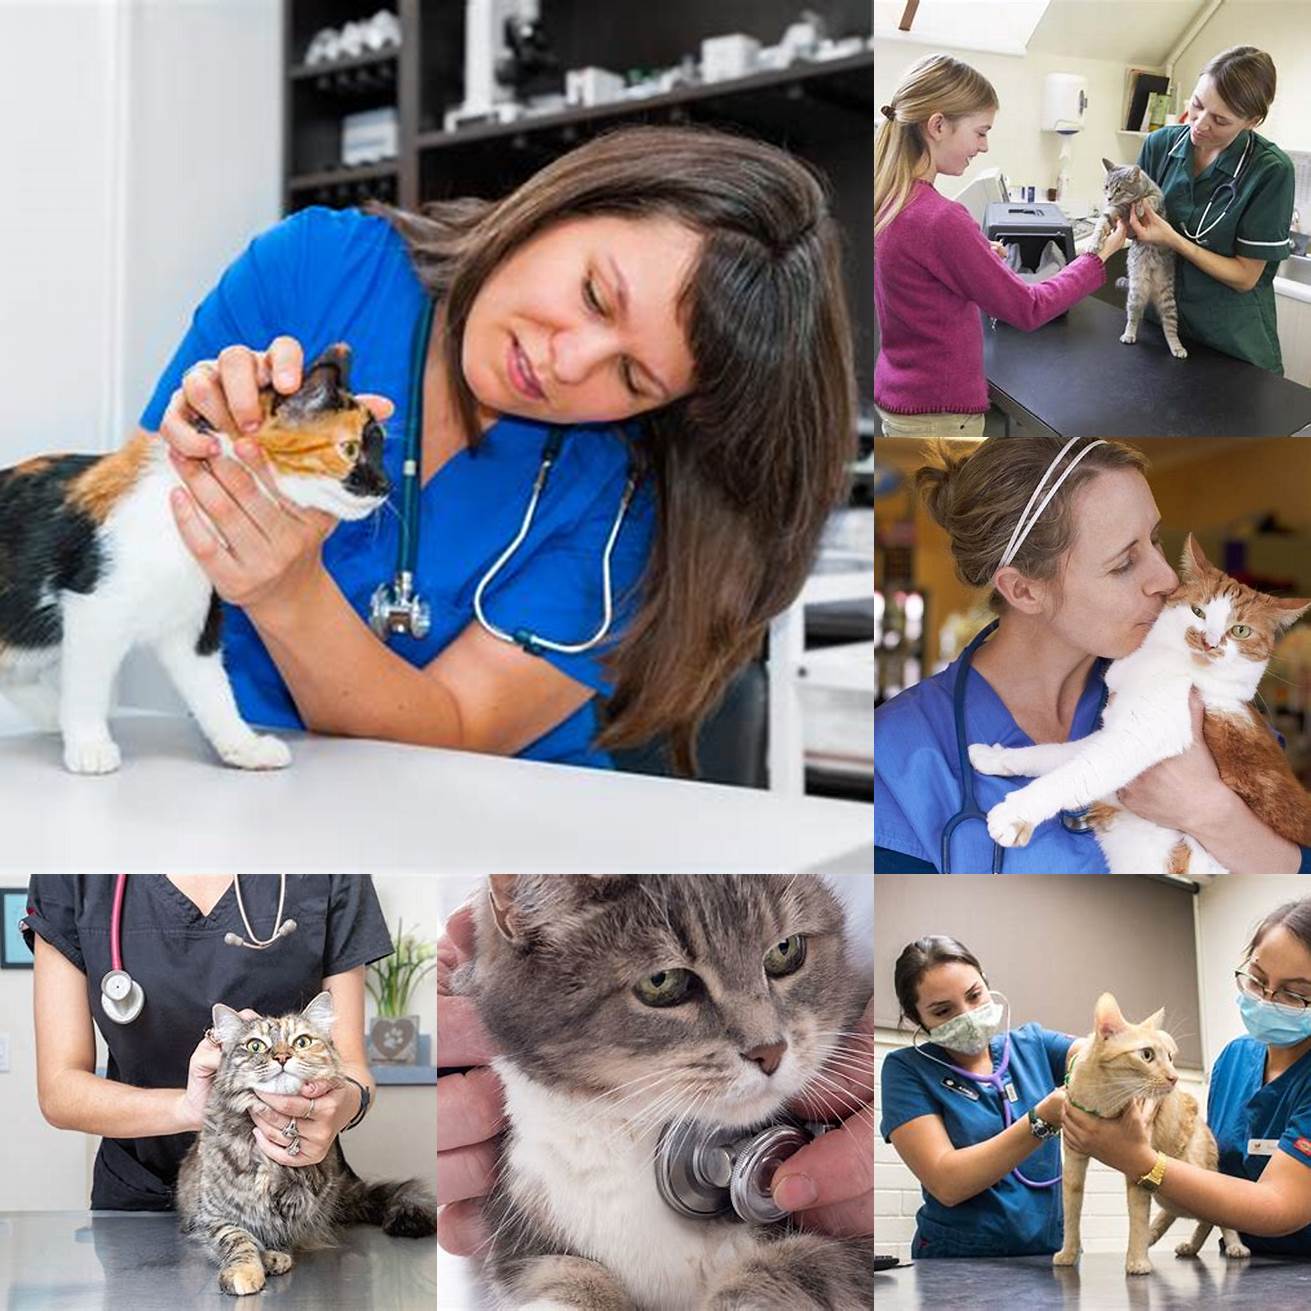 Take your cat to the veterinarian regularly